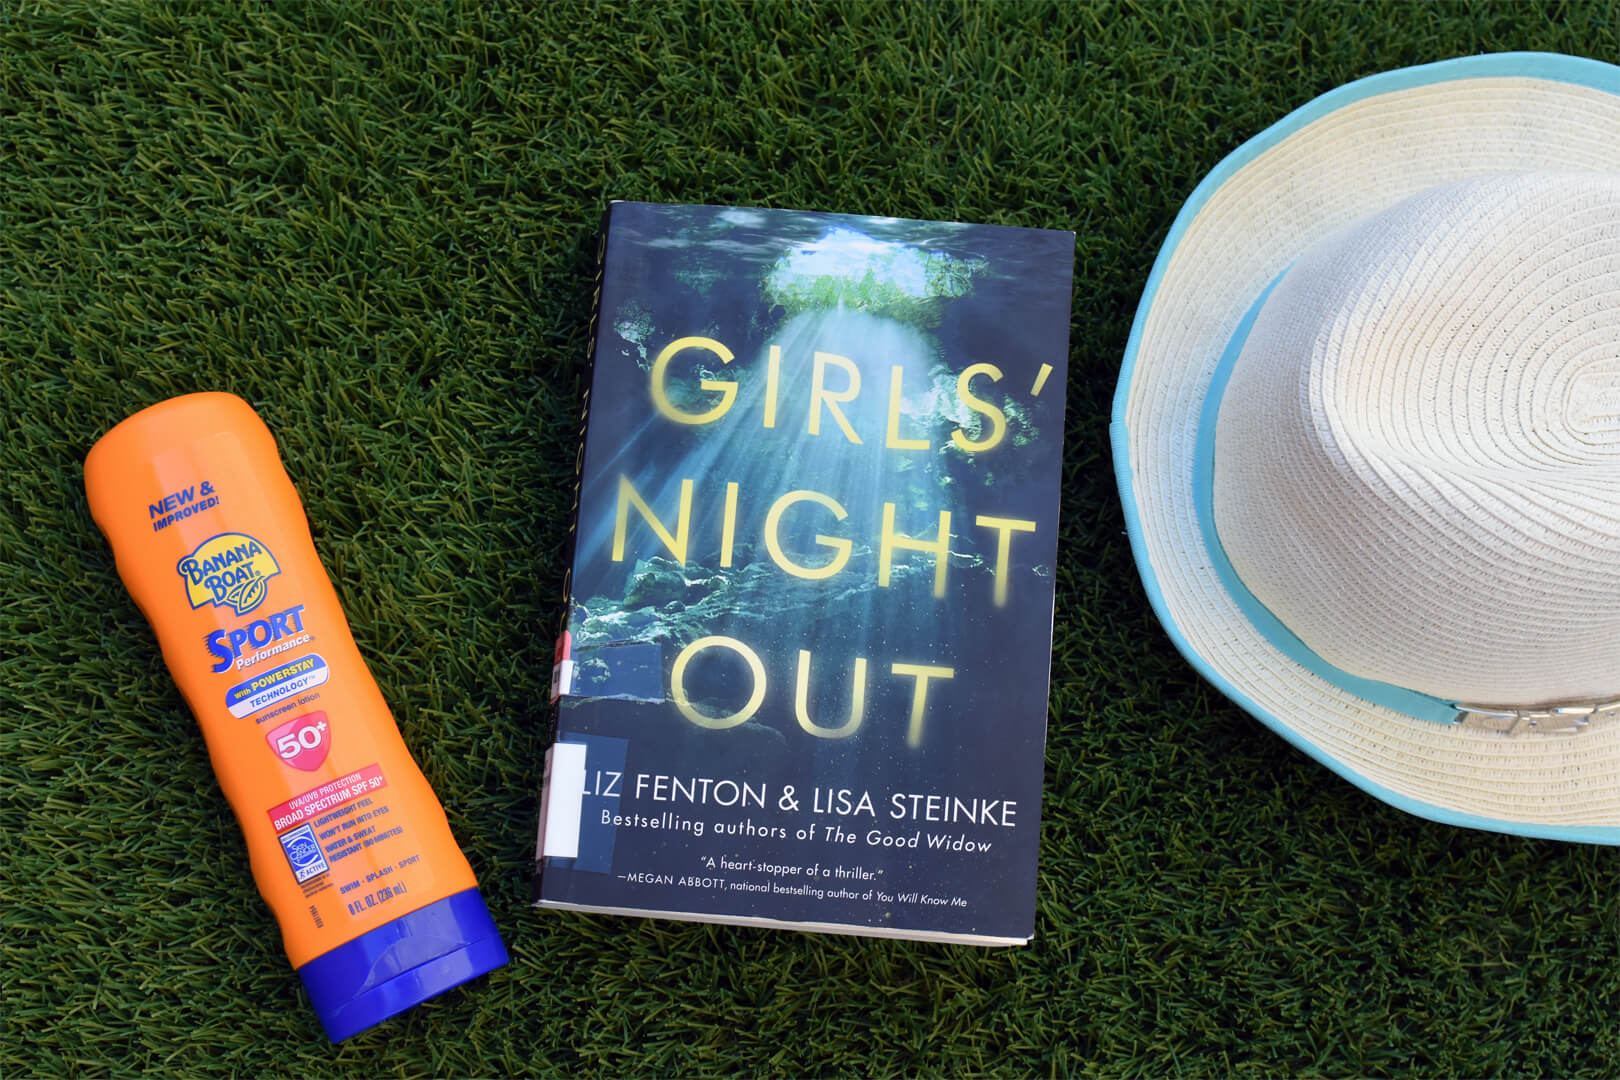 Book Club Questions for Girls’ Night Out by Liz Fenton and Lisa Steinke